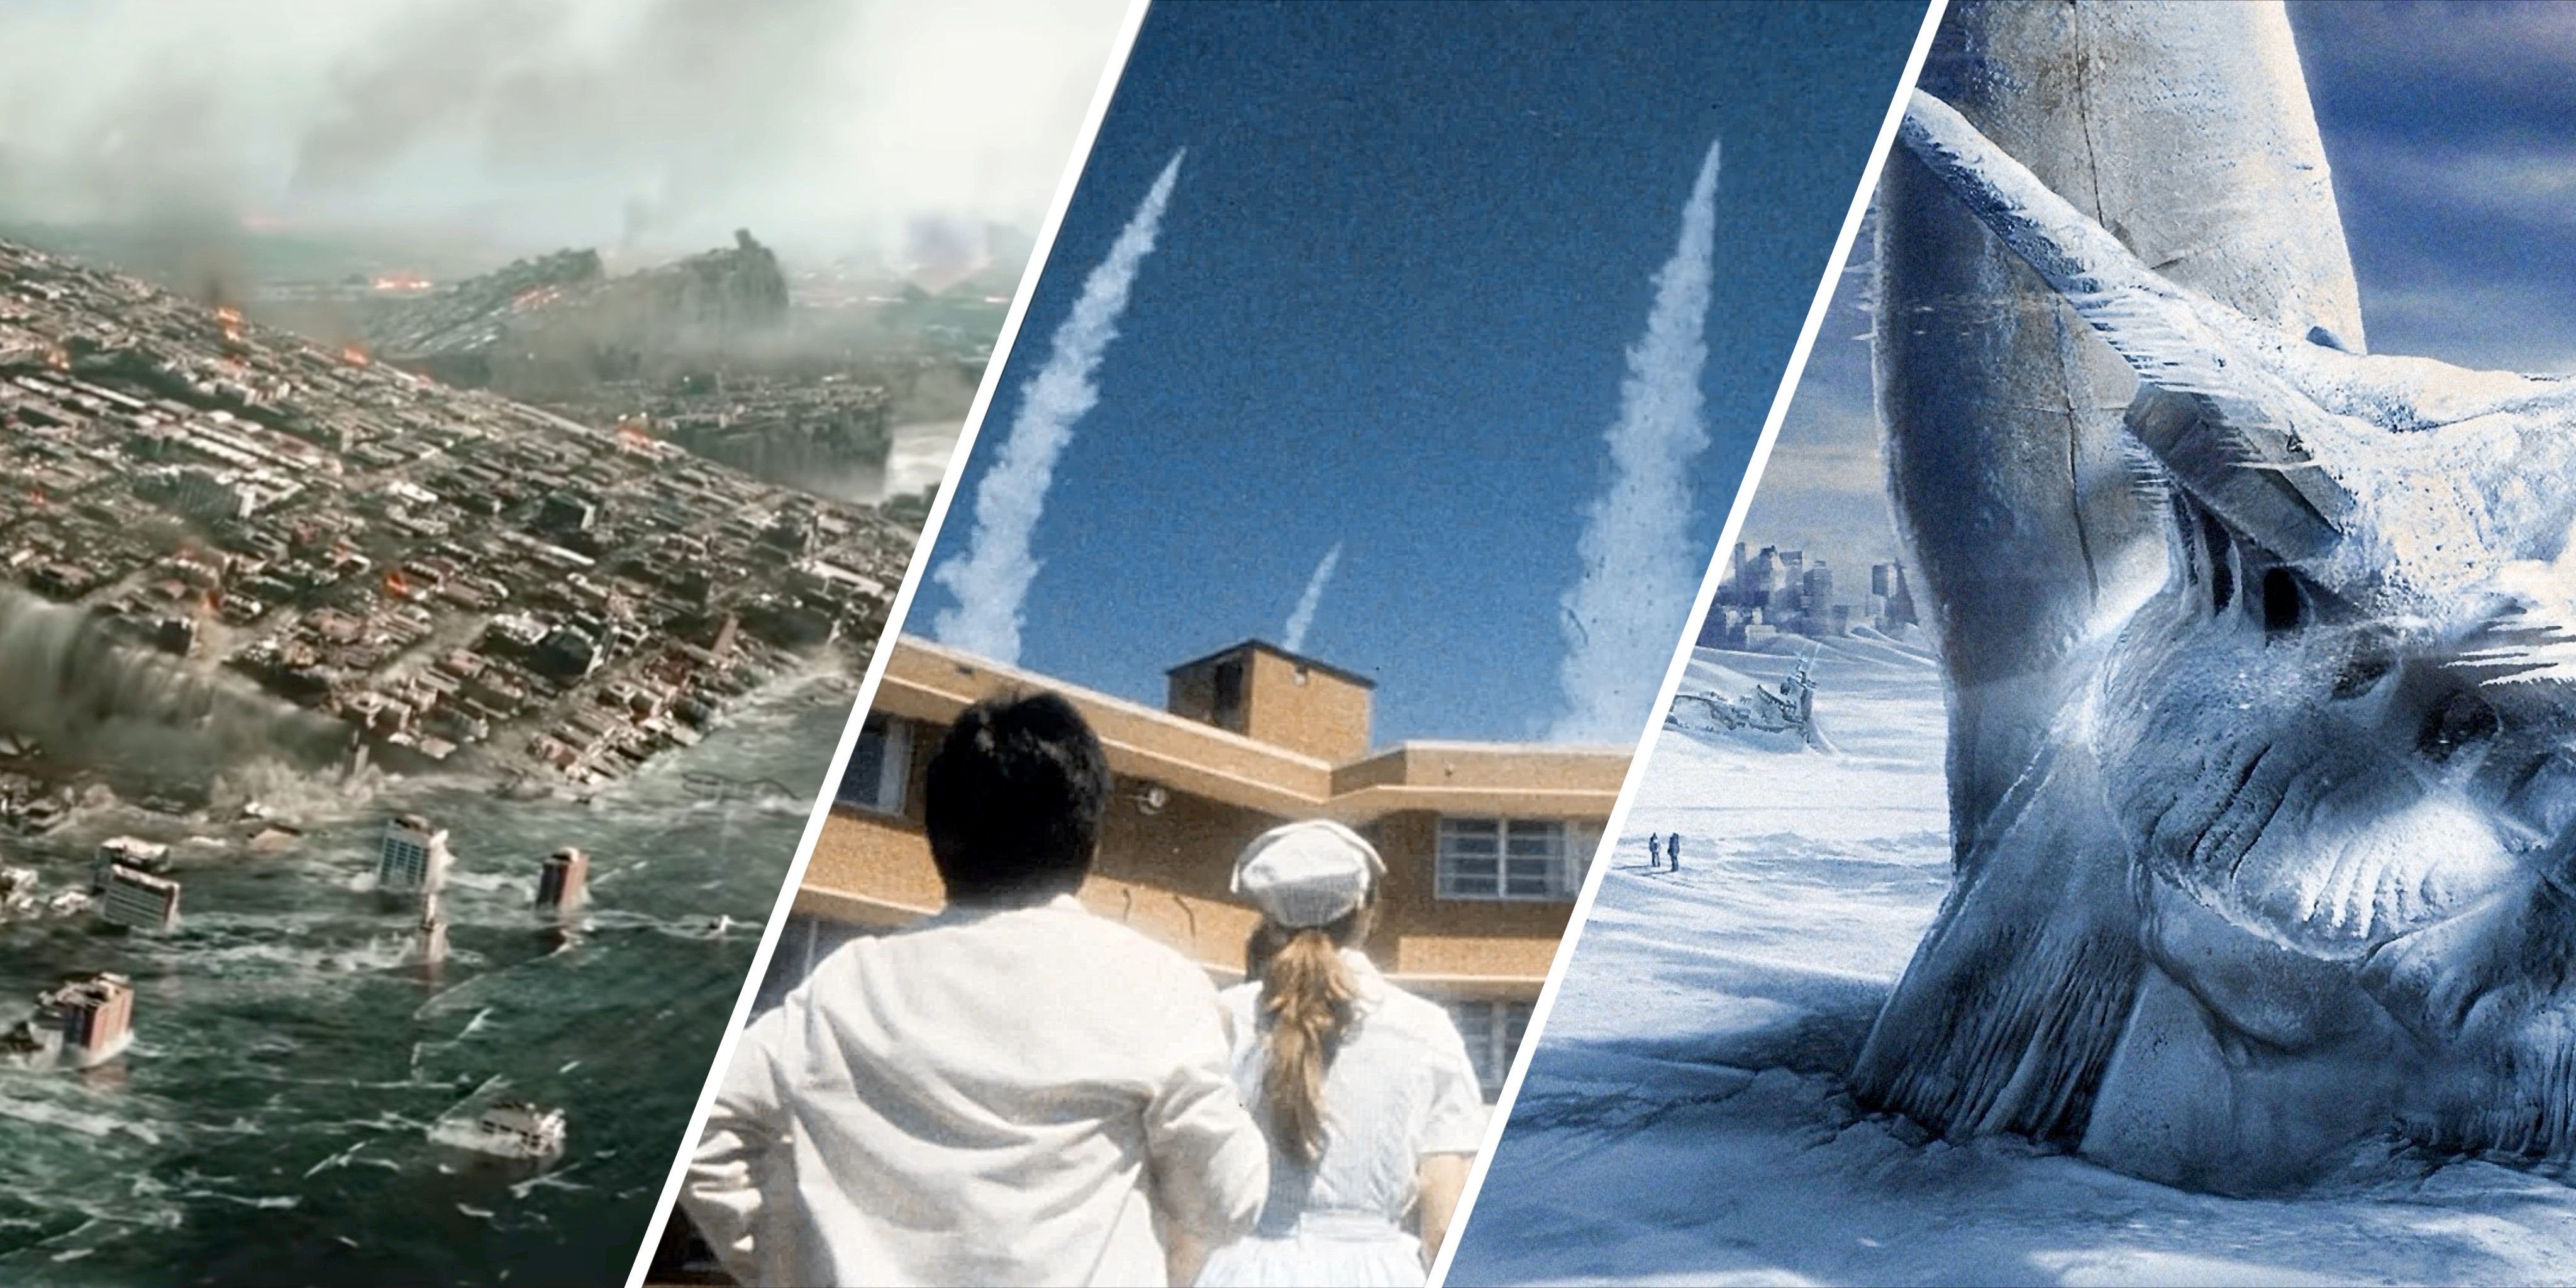 10 Best Disaster Movies Set in a City, According to Rotten Tomatoes